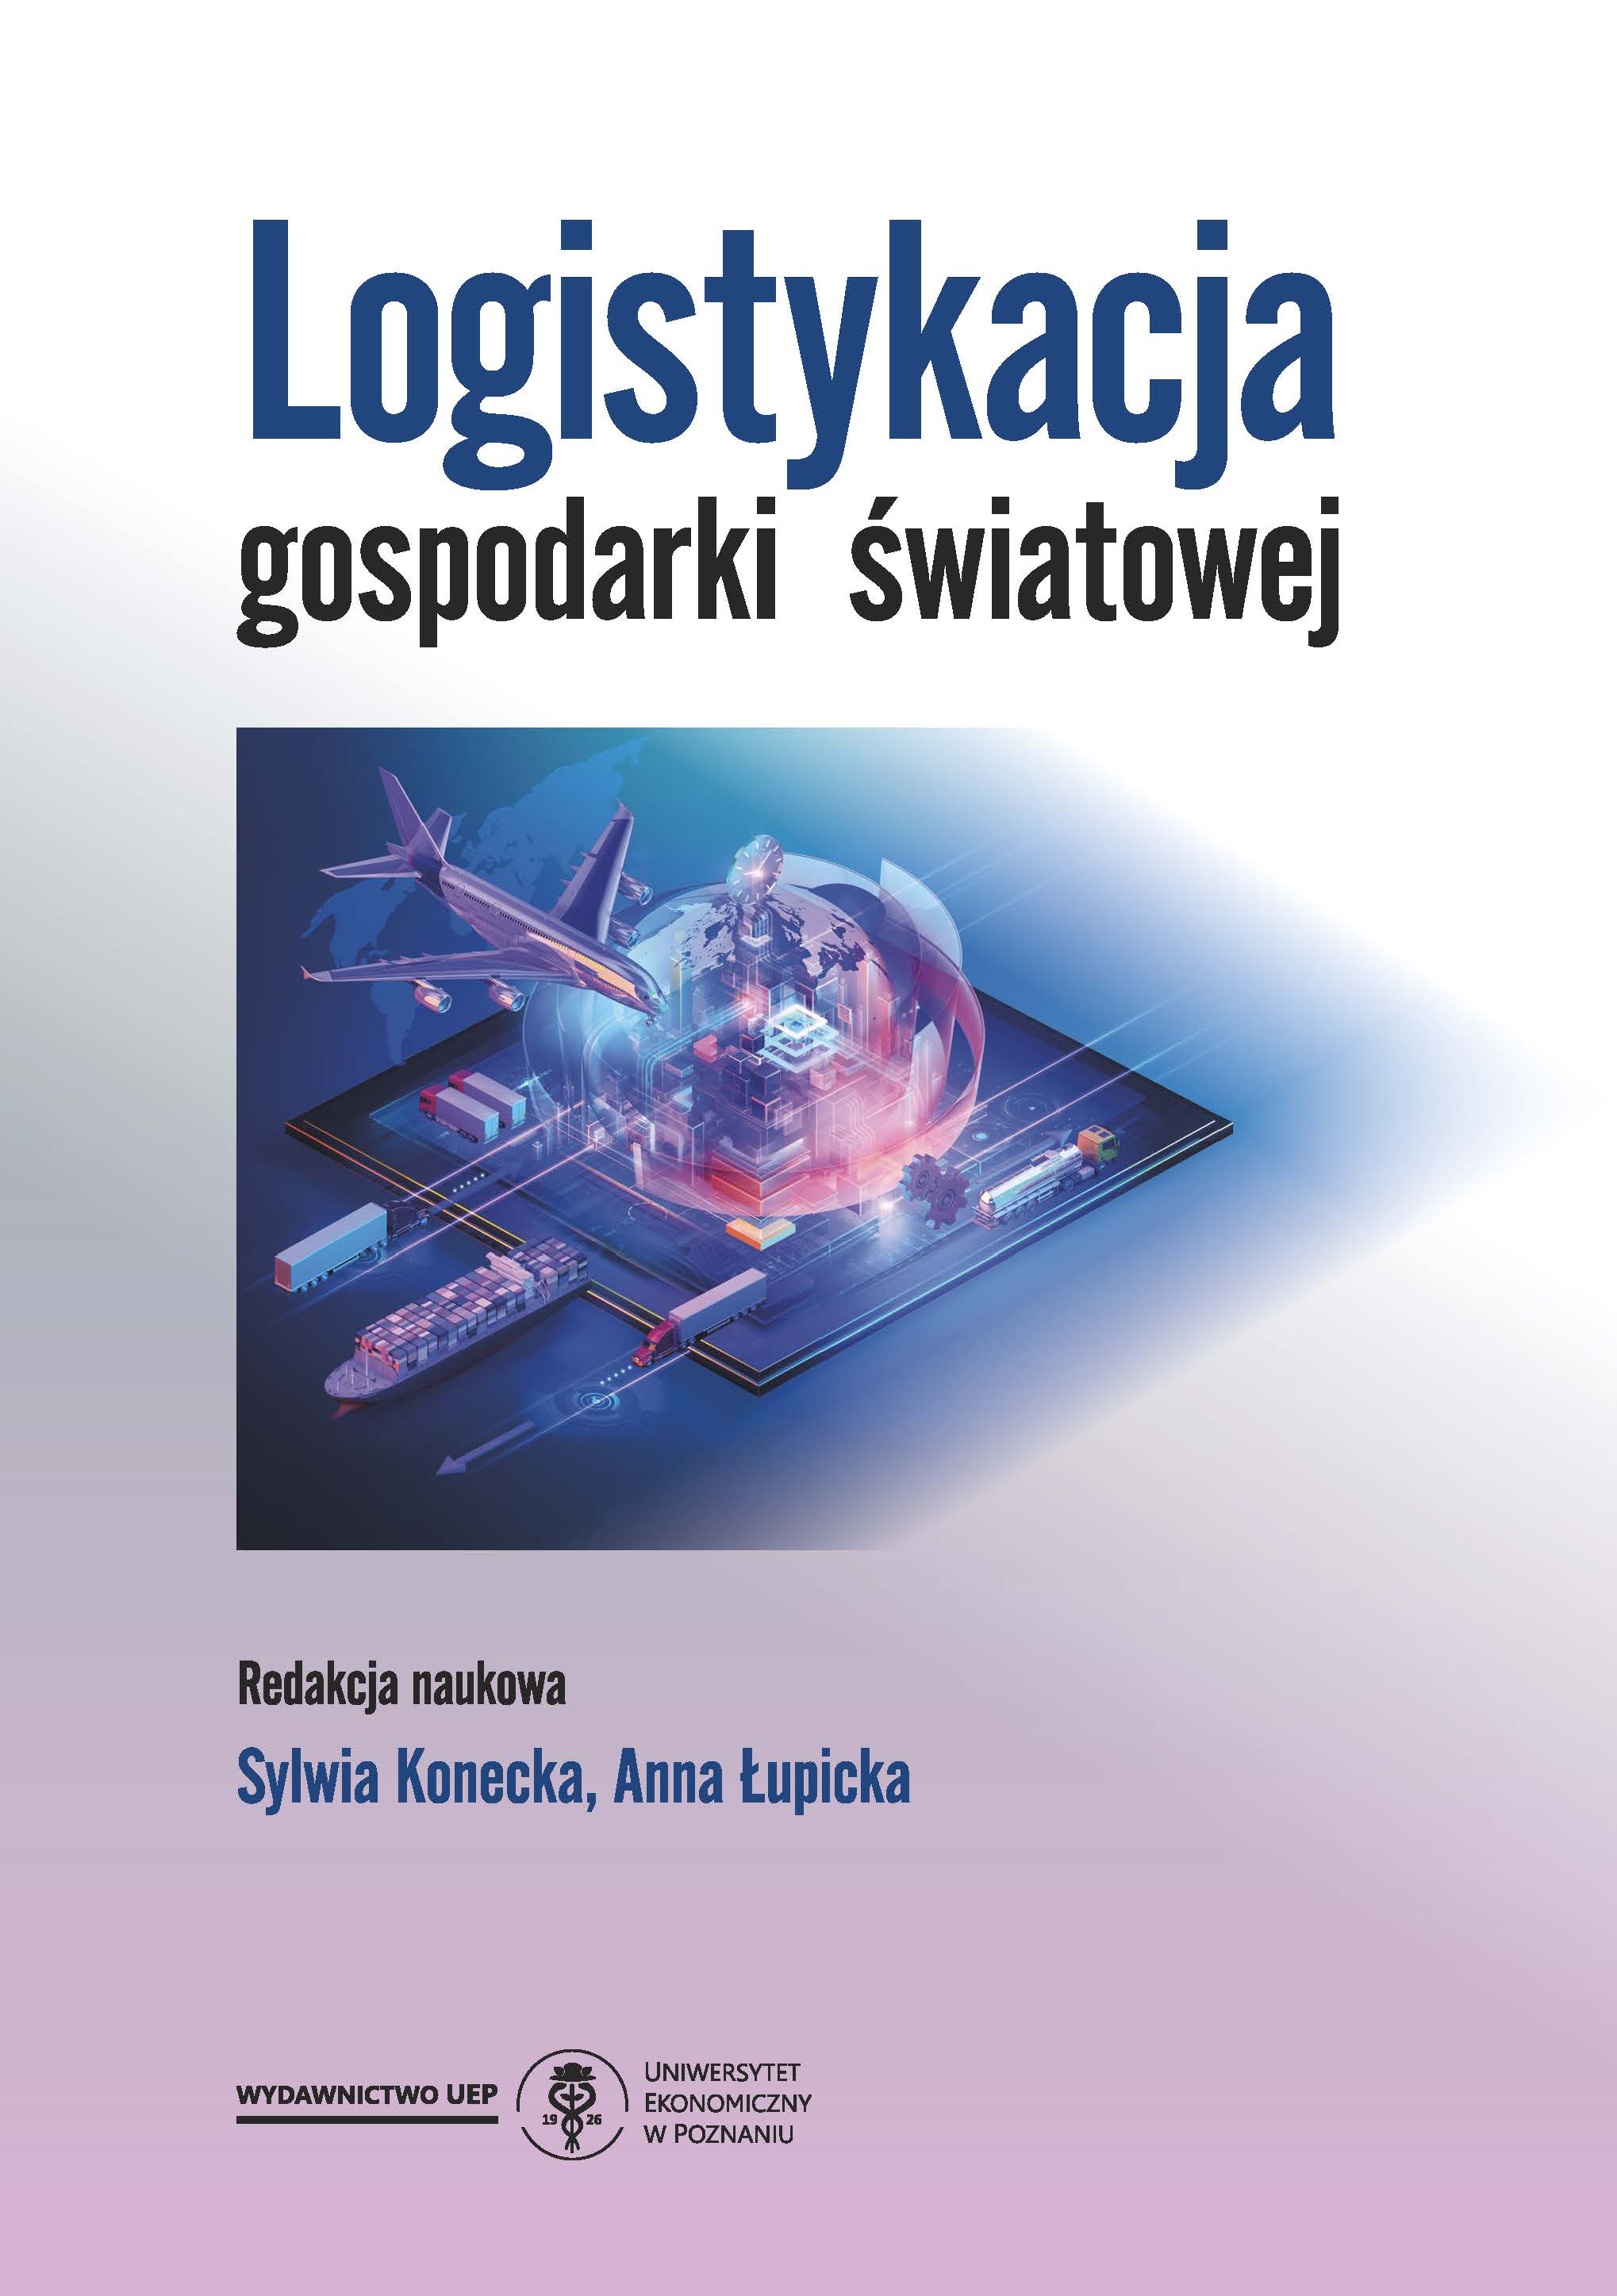 Cost-effectiveness of vocational education of logisticians in Poland in the context of the examinations process